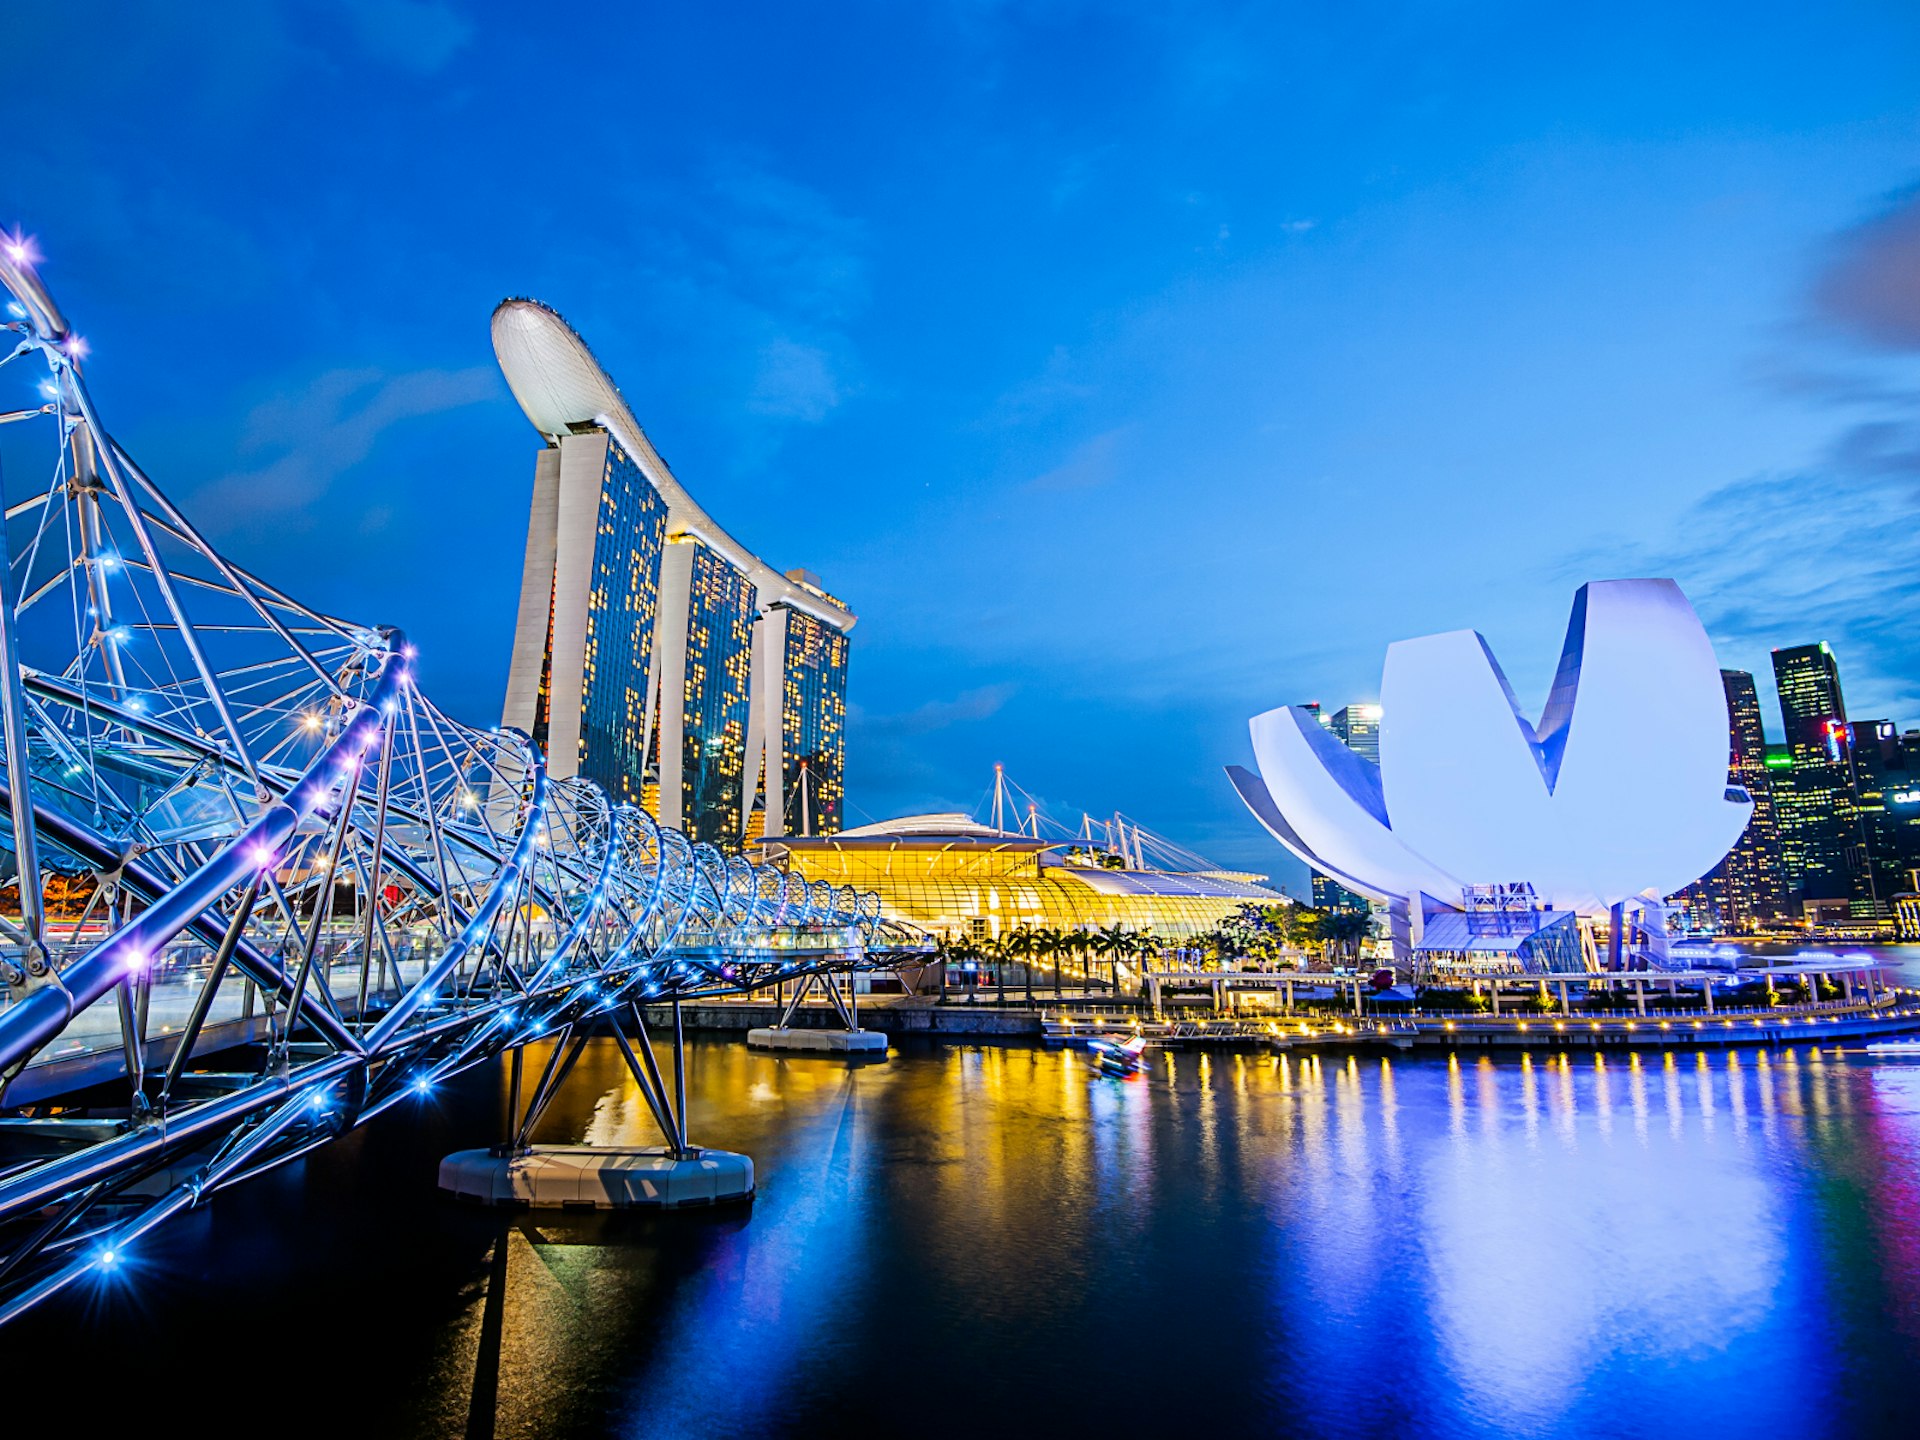 Alternative festivals - the Helix Bridge and Singapore skyline just after sundown. The blue and purple lights on the intricate bridge are reflected in the still, dark water. 